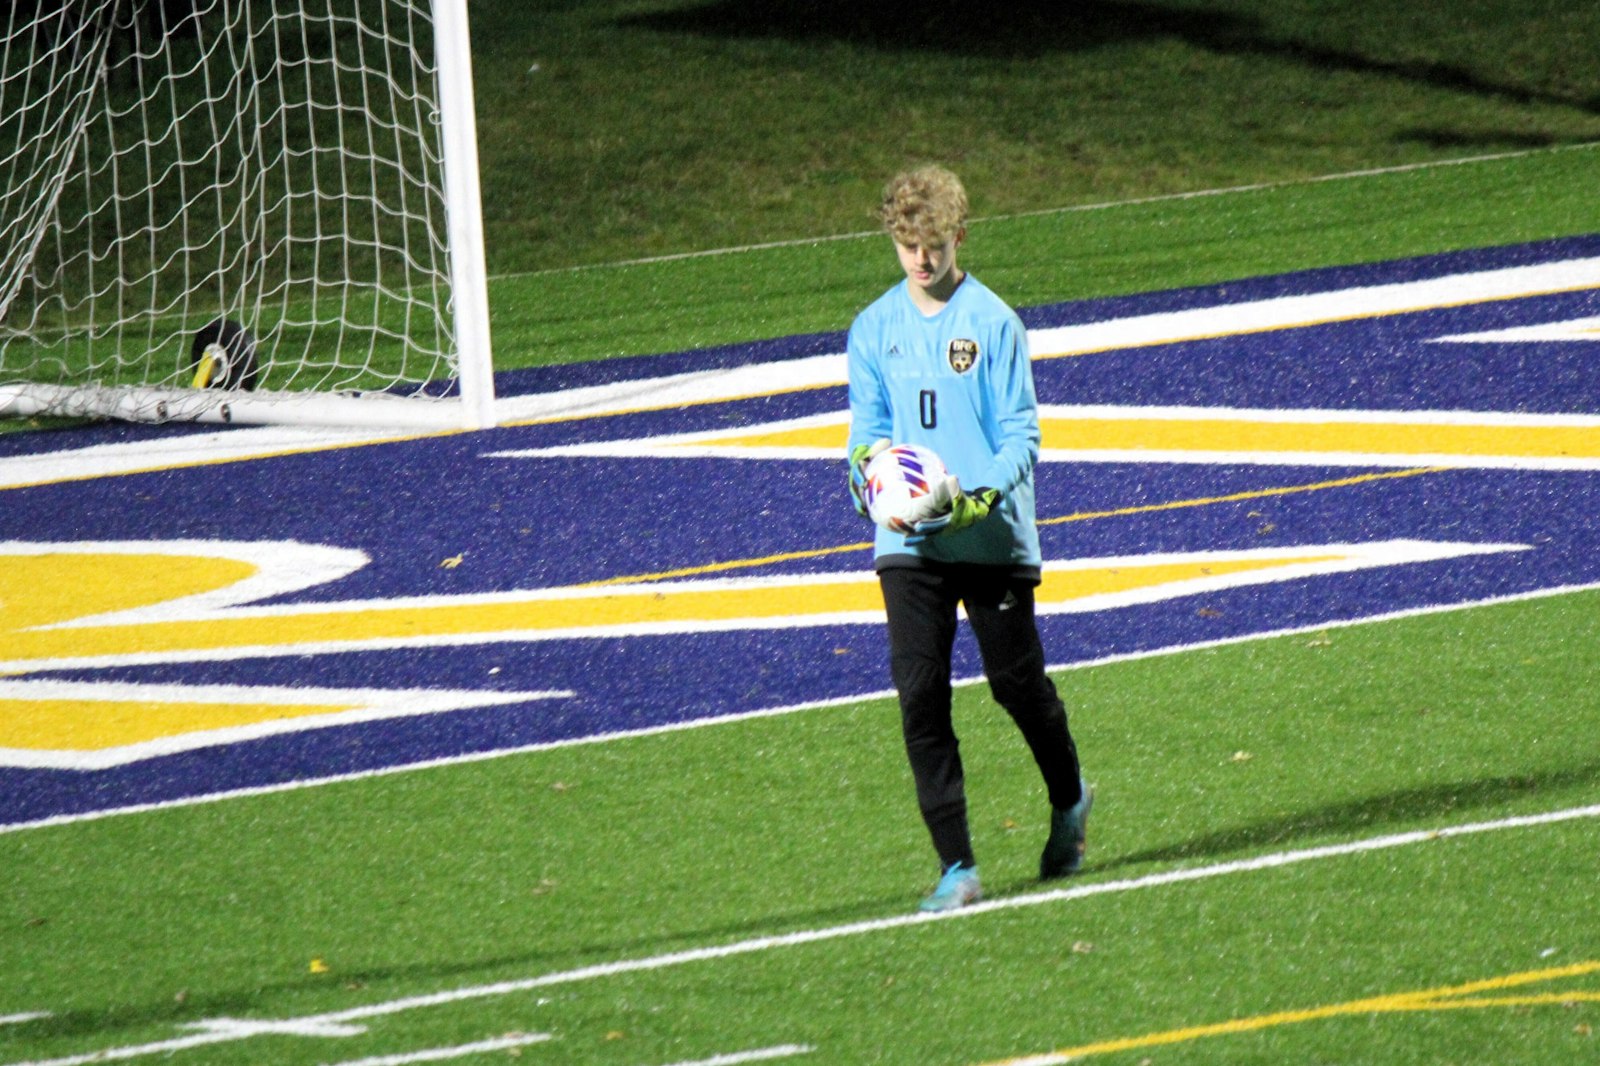 Goalkeeper Gregory Altman helped Bishop Foley win its second post-season contest via penalty kicks on Oct. 26, defeating University-Liggett, 1-0. Altman turned away three of five Liggett attempts. (Photo by Wright Wilson | Special to Detroit Catholic)